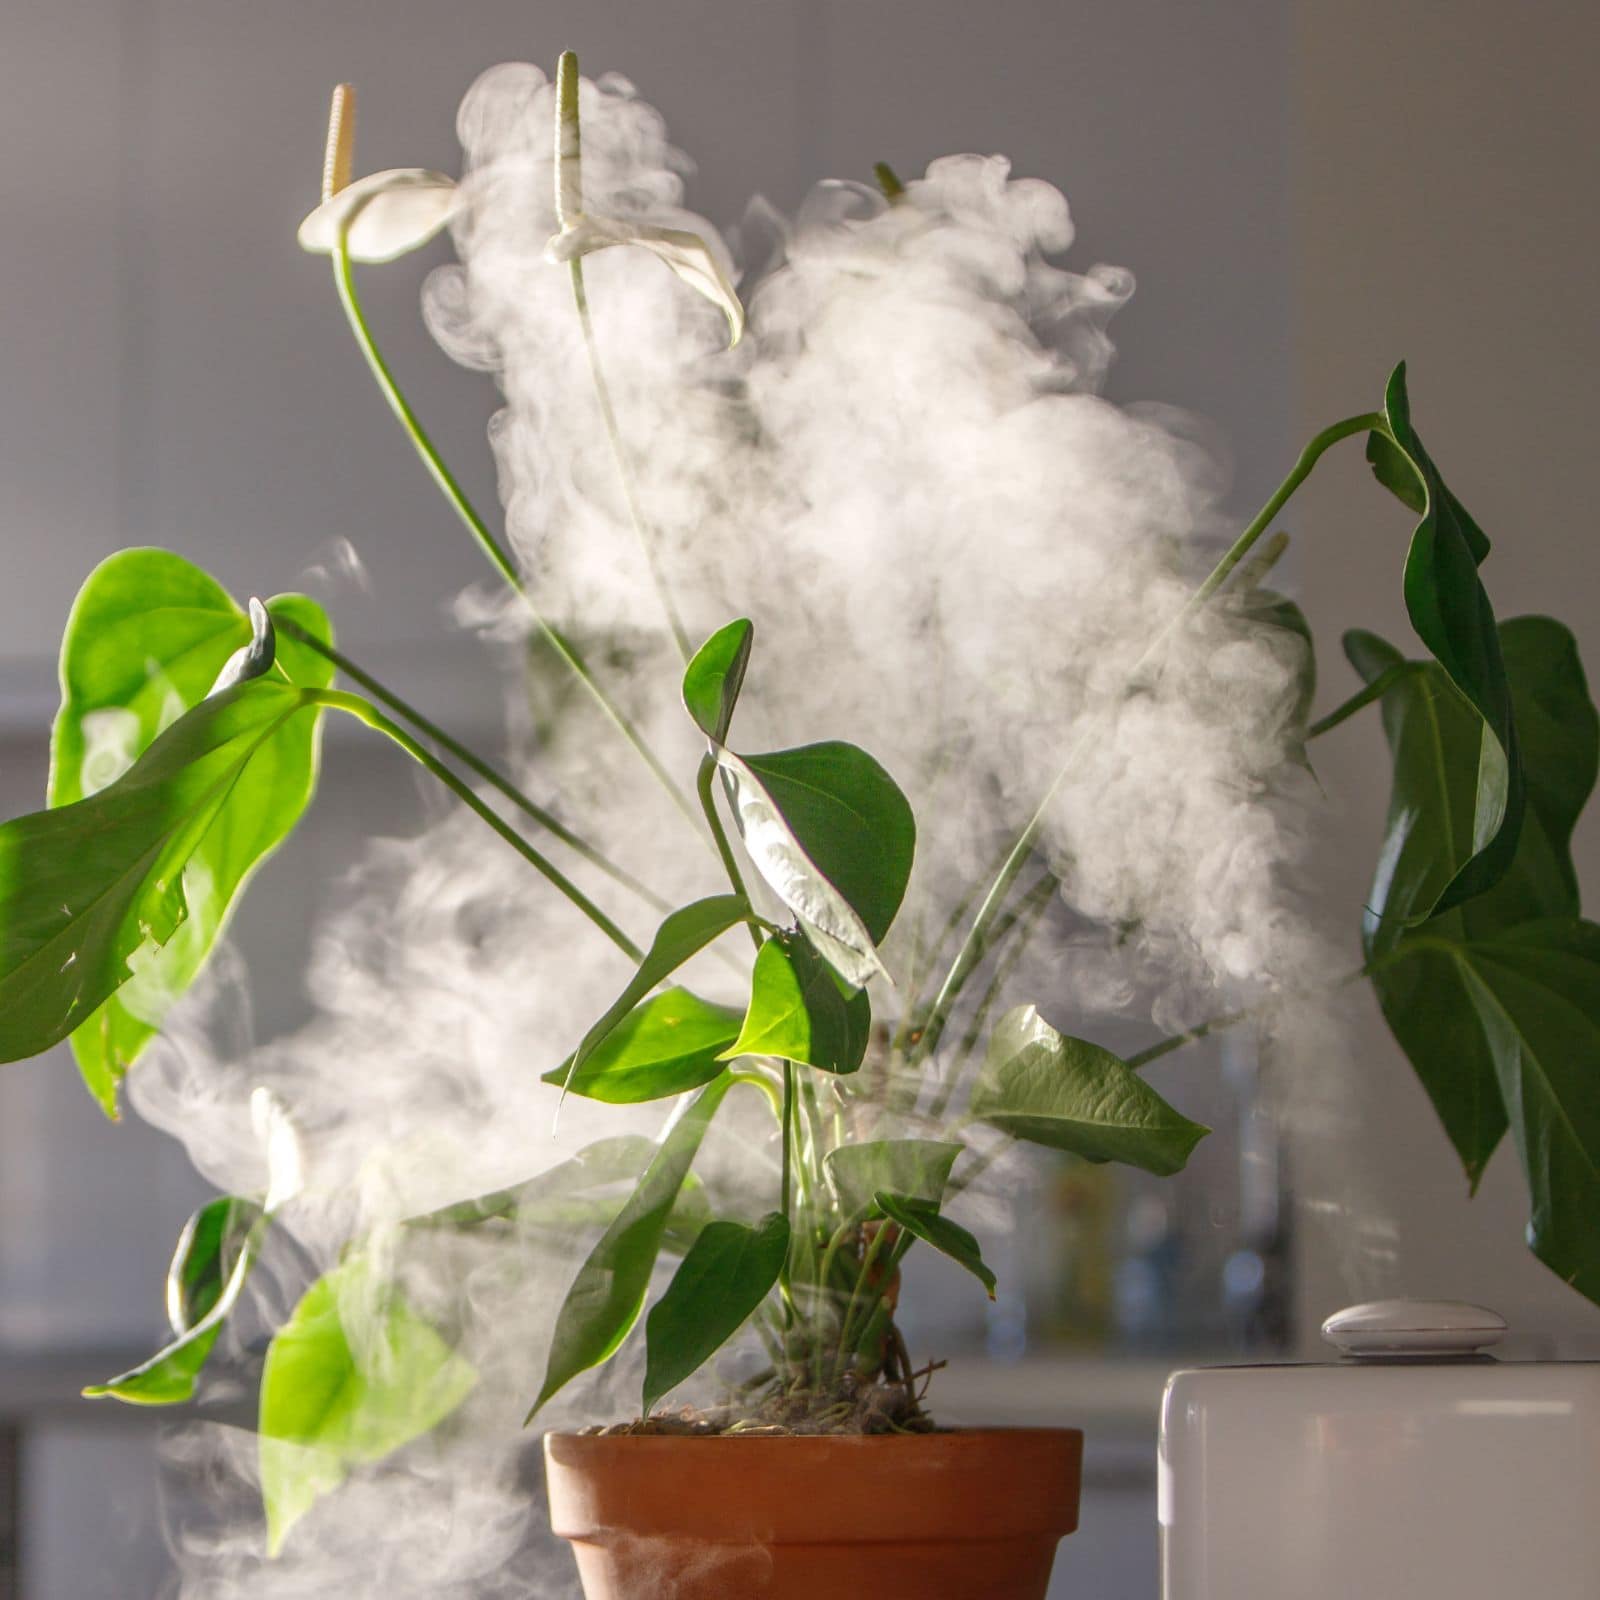 How To Increase Humidity For Indoor Plants-7 Simple Ways